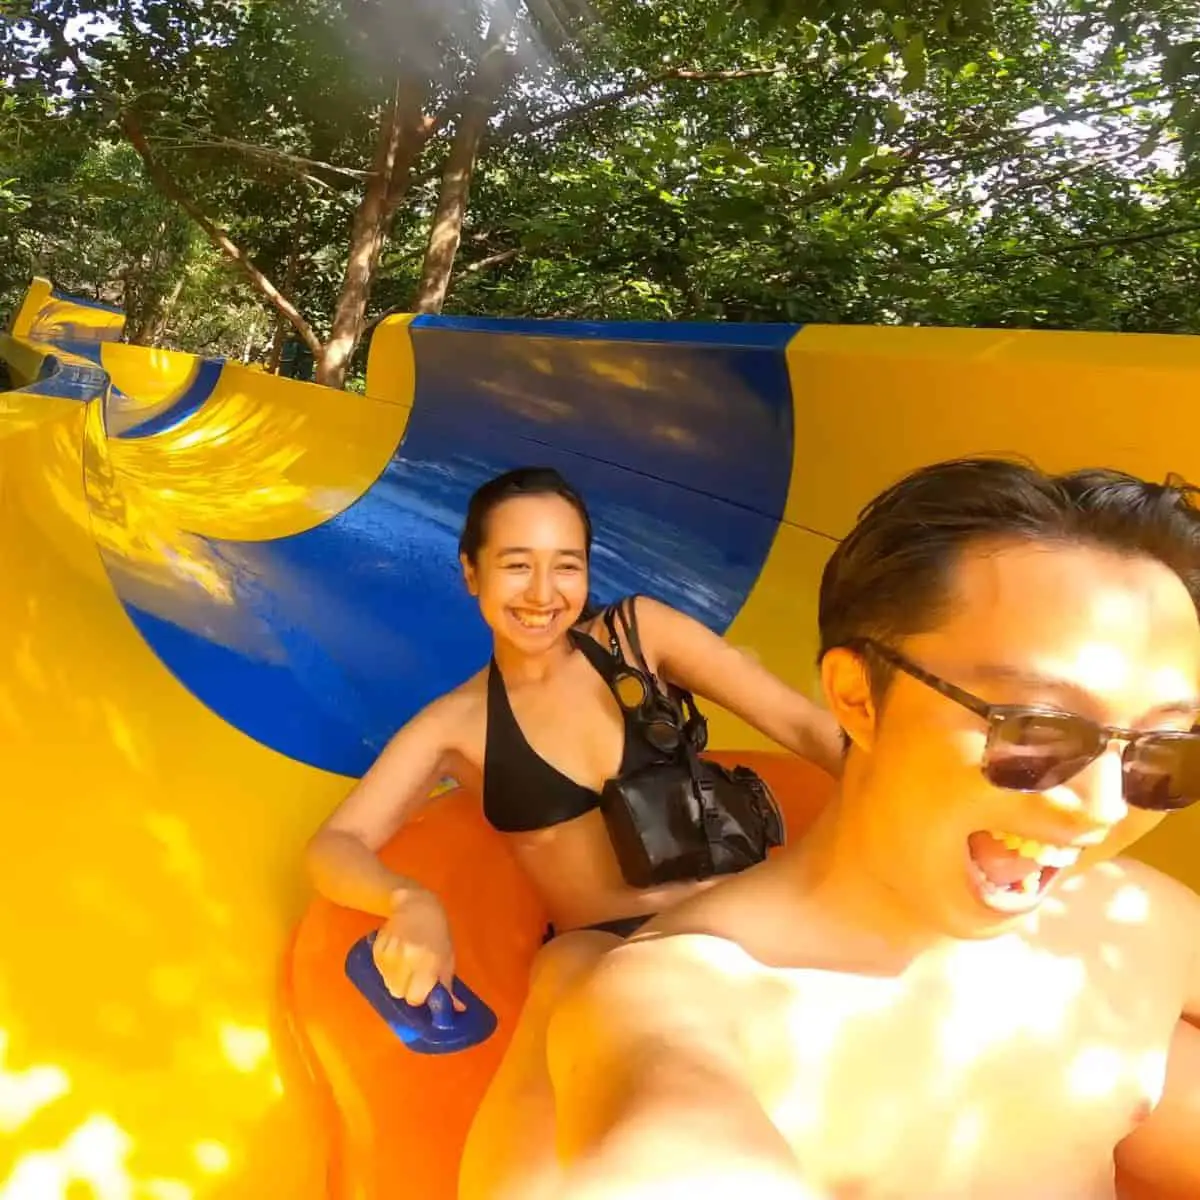 Victoria and Ruiz in worlds longest tube water slide in Escape Penang Things To Do With Kids in Penang